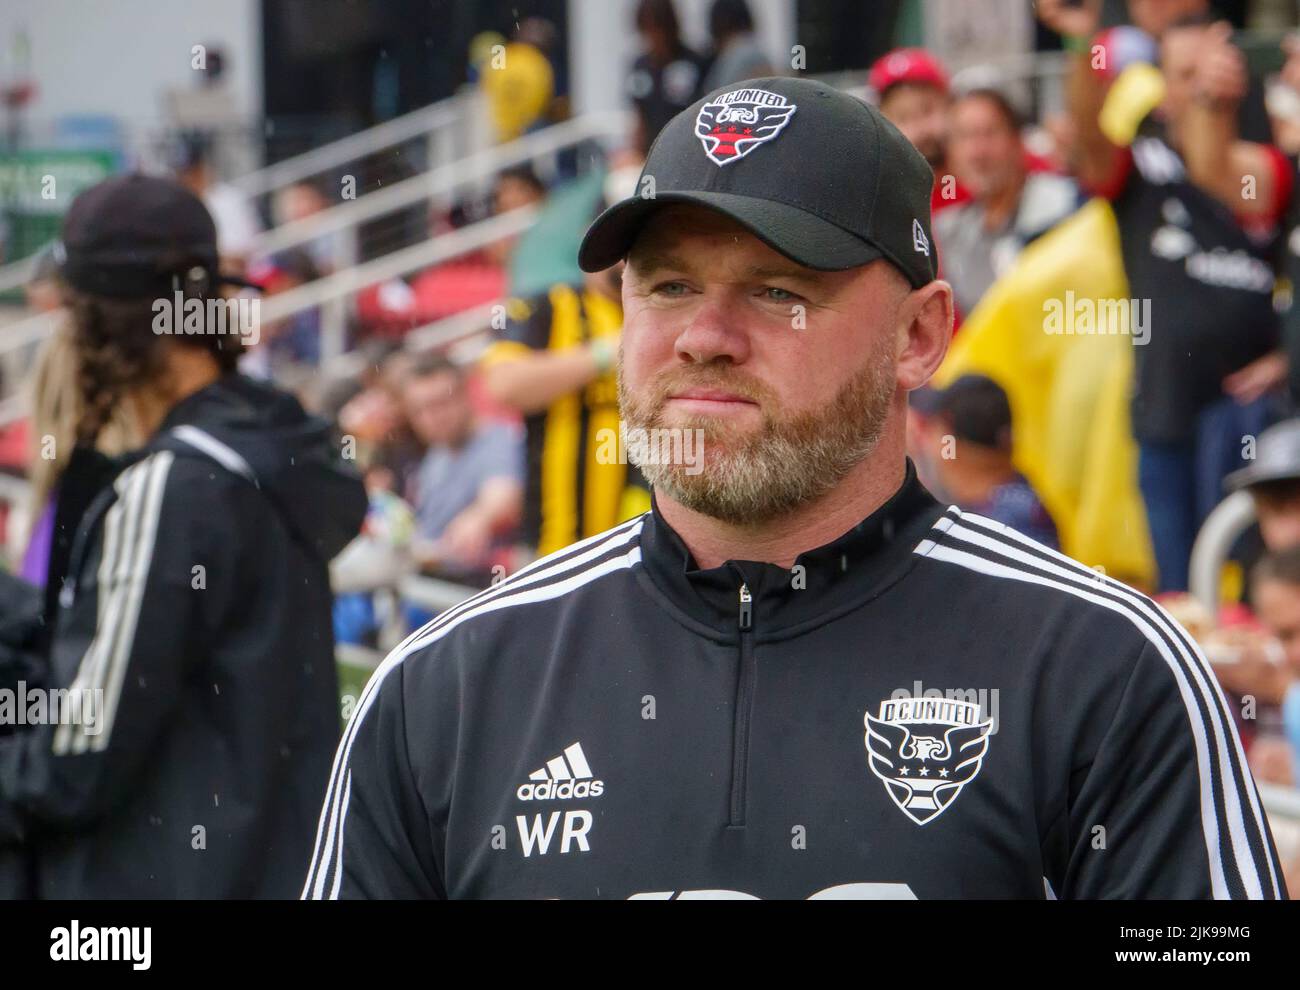 WASHINGTON, DC, USA - 31 JULY 2022: Wayne Rooney on the bench in his first game as head coach of D.C United during a MLS match between D.C United and the Orlando City SC, on July 31, 2022, at Audi Field, in Washington, DC. (Photo by Tony Quinn-Alamy Live News) Stock Photo